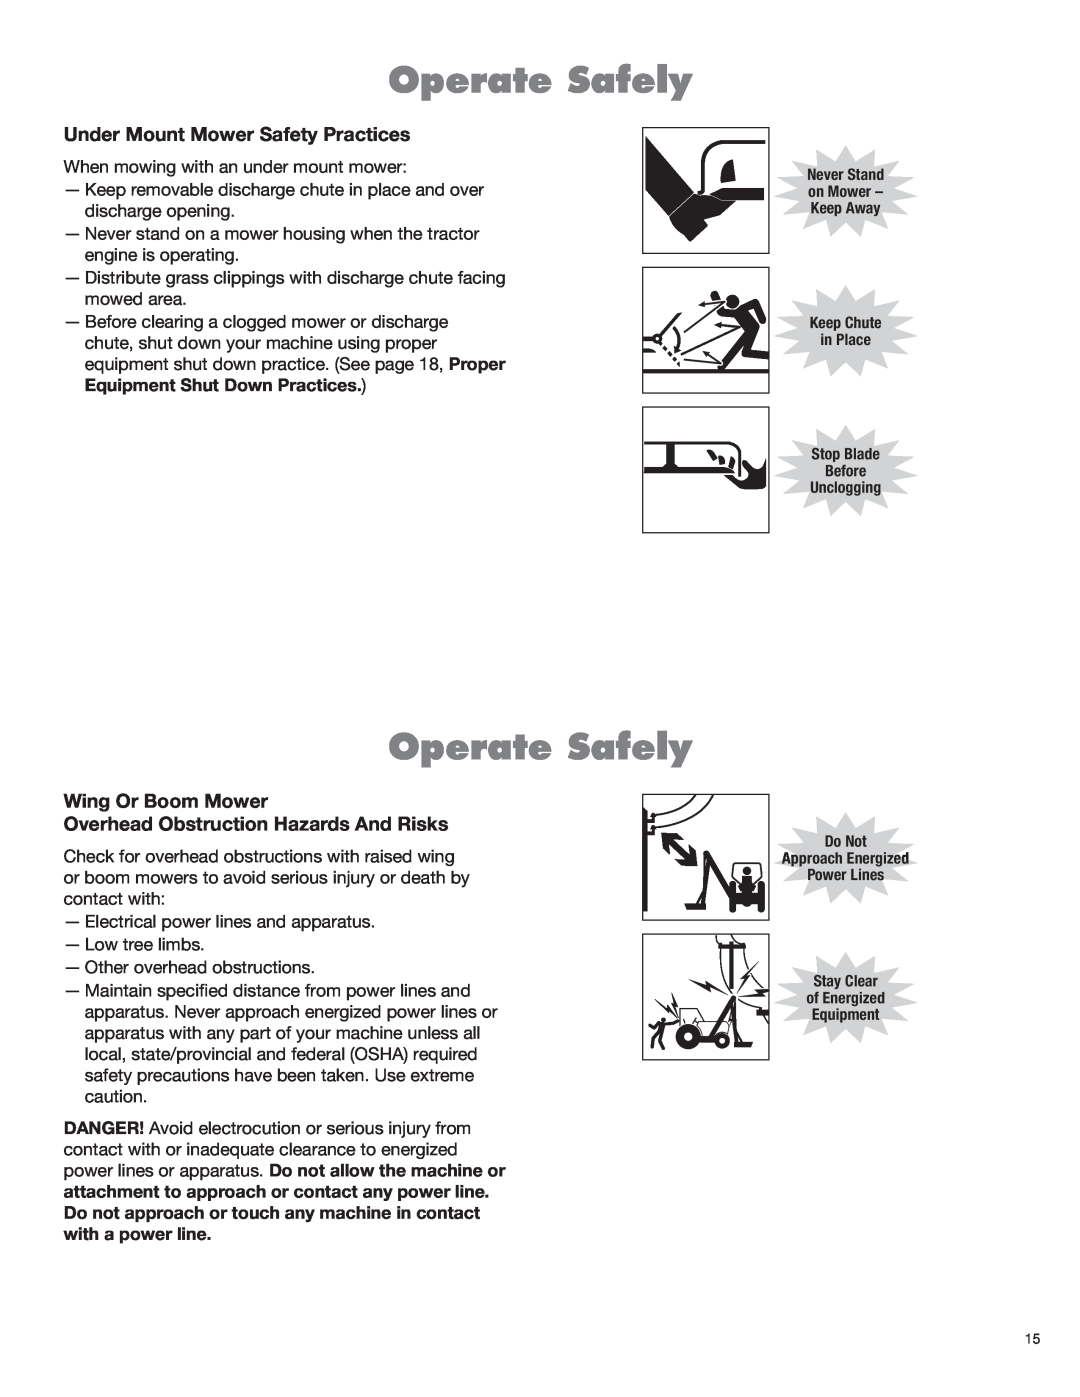 Servis-Rhino 2160 manual Operate Safely, Under Mount Mower Safety Practices 